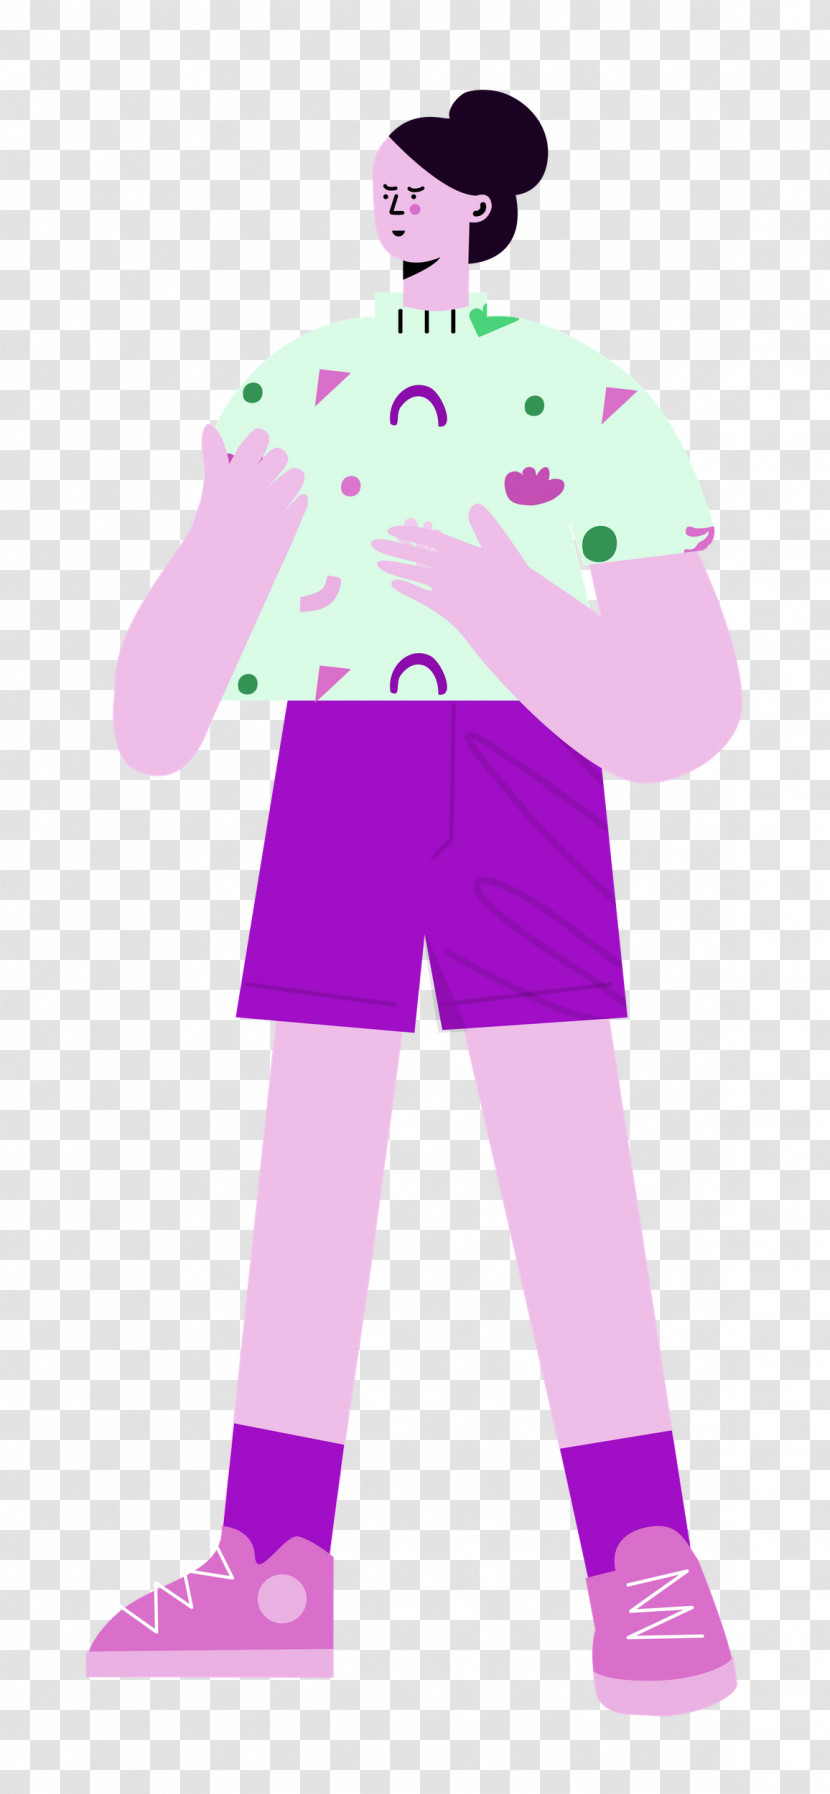 Standing Shorts Woman Transparent PNG